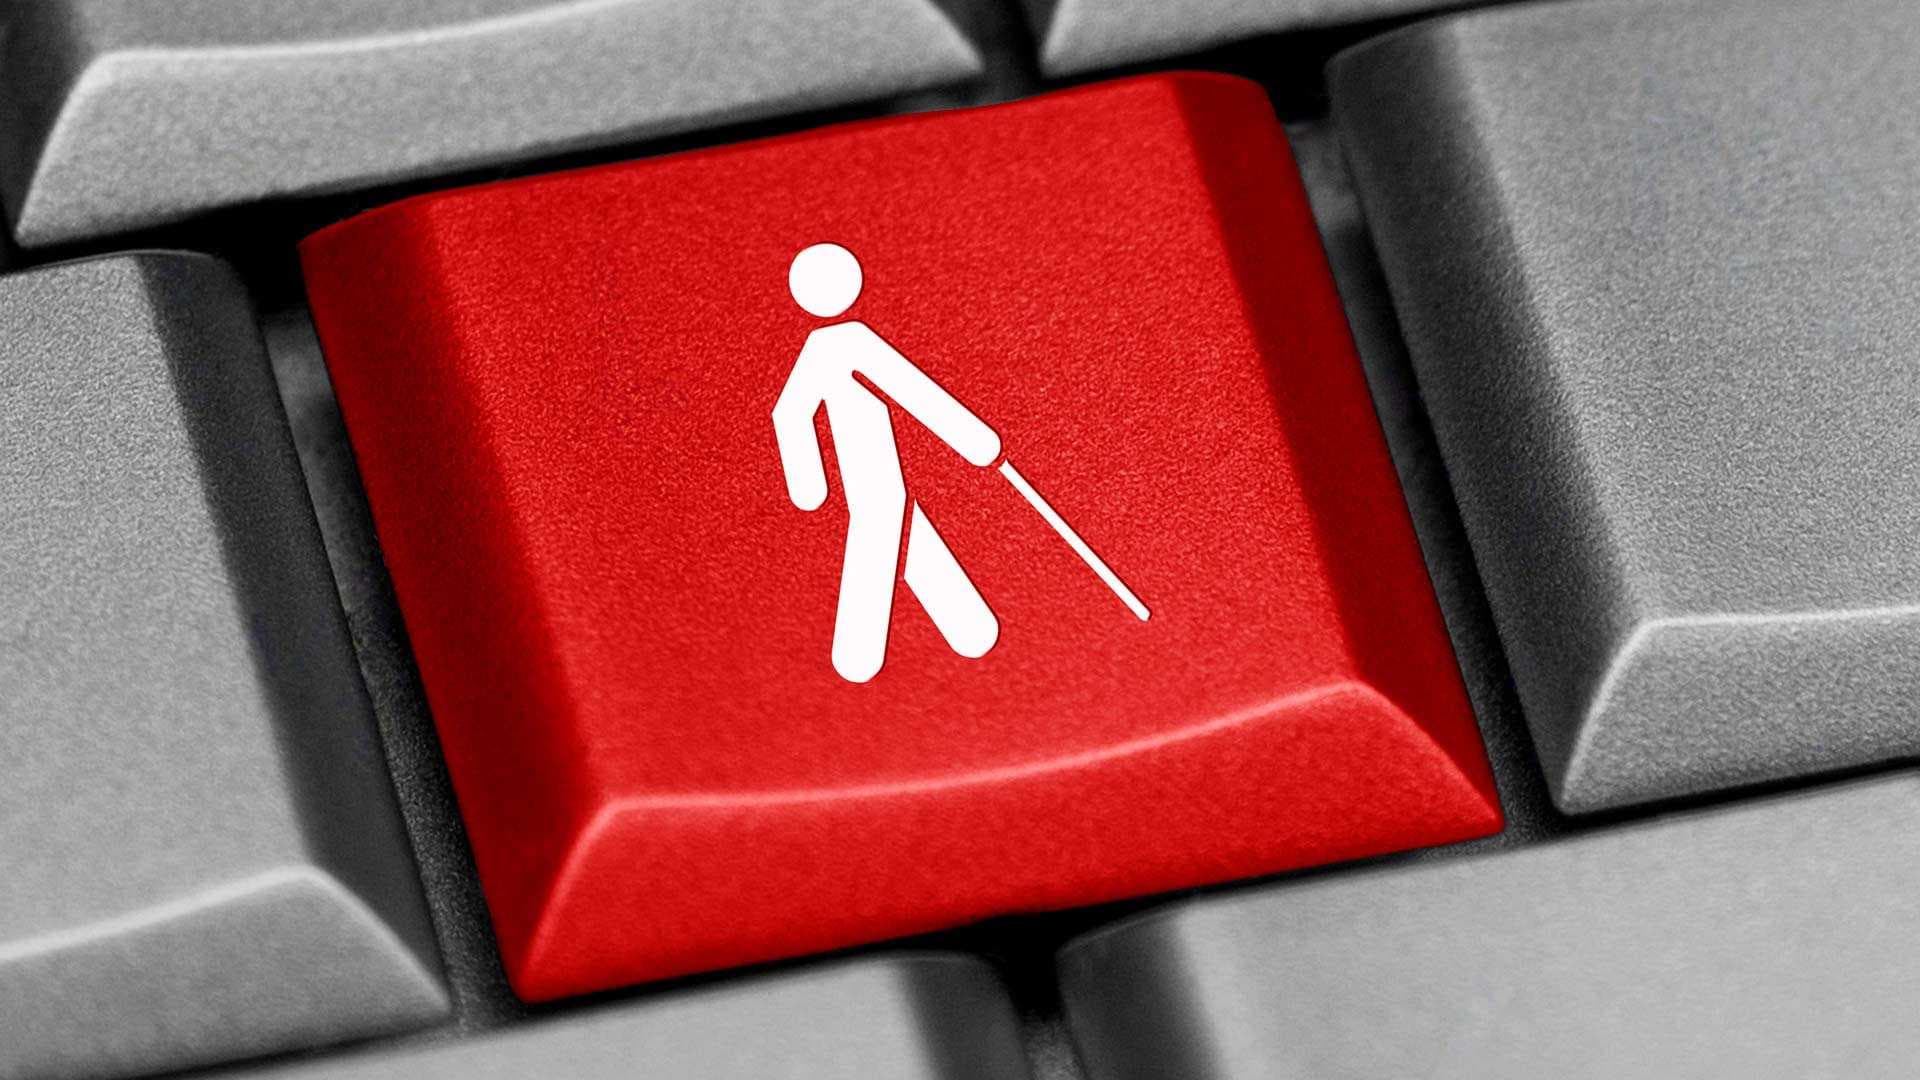 Closeup of a red keyboard key with a white accessibility icon showing a person using a cane